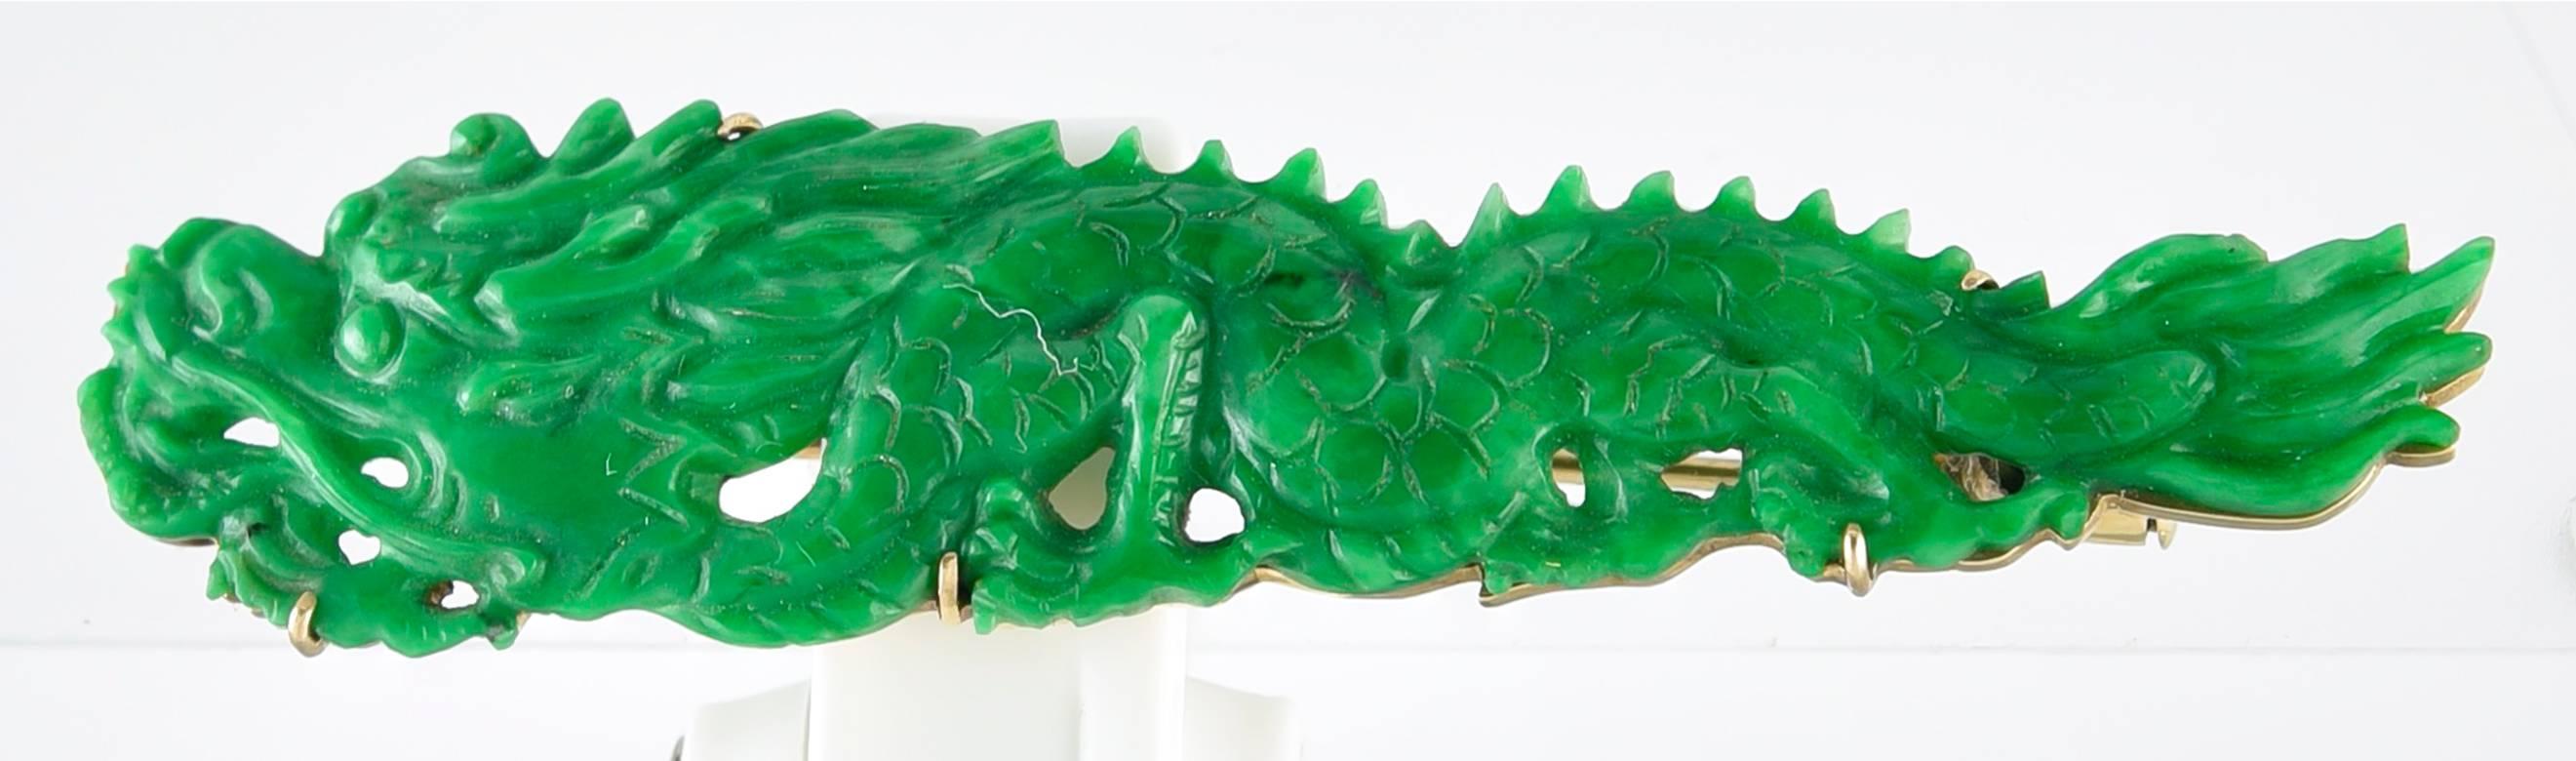 The Jade of rich opaque colour with good detailing which captures the movement of a Chinese stalking Dragon.
Carved, most probably, in Hong Kong in the early part of the 20th century, the carving is mounted on a Gold frame of the period, stamped